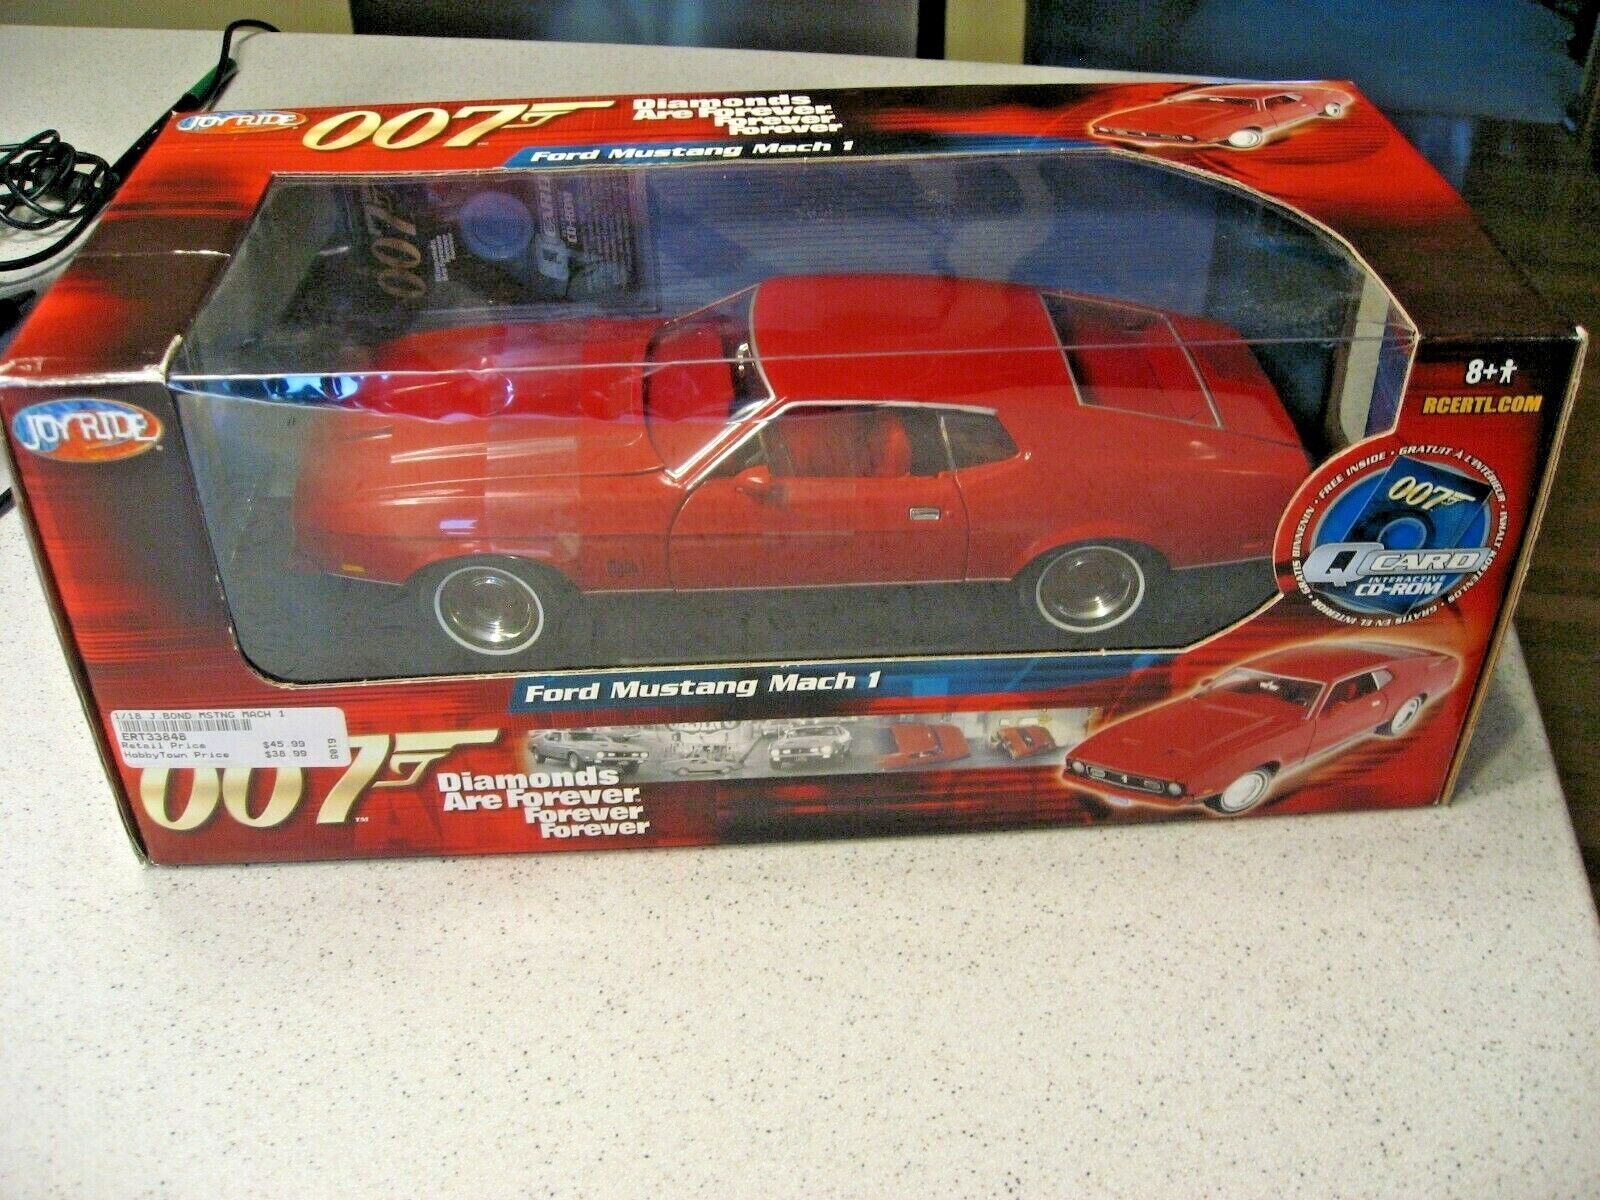 Joyride RC2 ERTL 1:18 James Bond 007 Diamonds are Forever Ford Mustang Mach 1